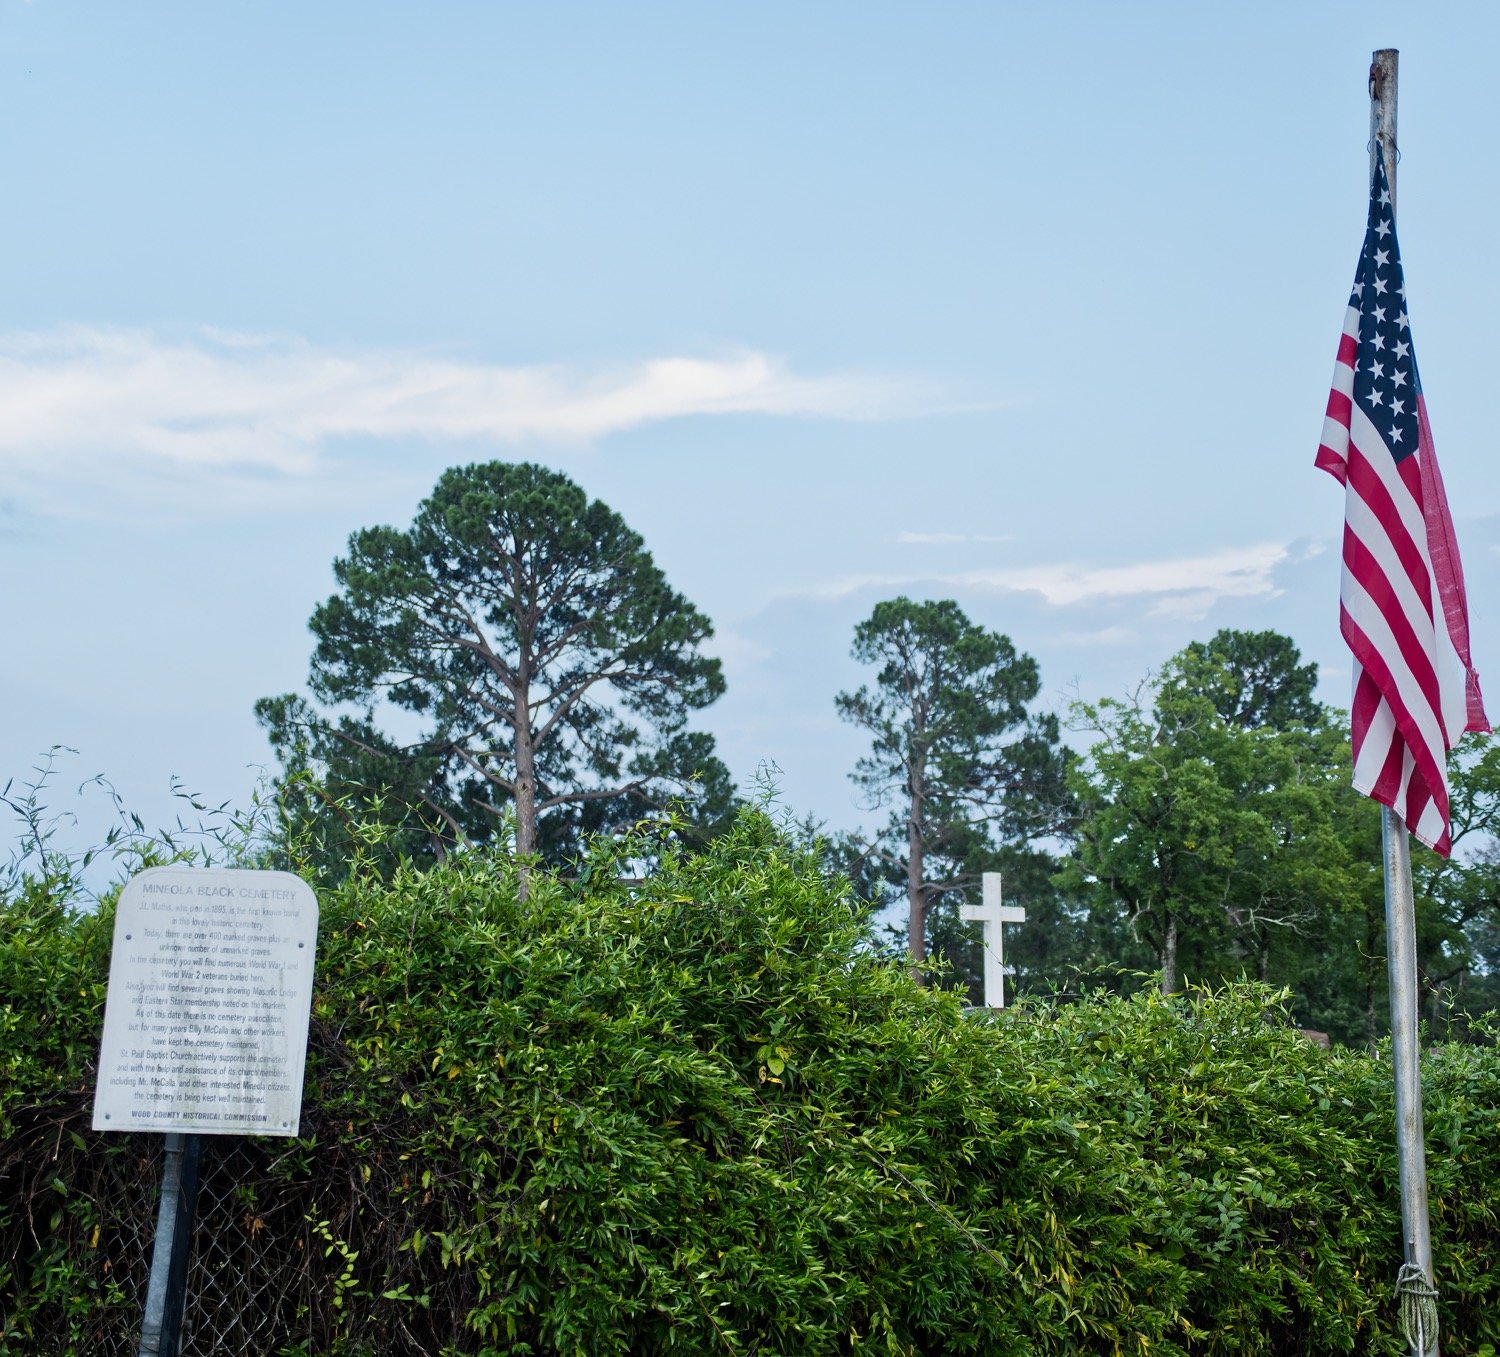 A historical marker and American flag stand just inside the fence between Cedar Memorial Gardens and the Black cemetery in Mineola, with a cross in the background on the other side. The fence is scheduled to be taken down next week.